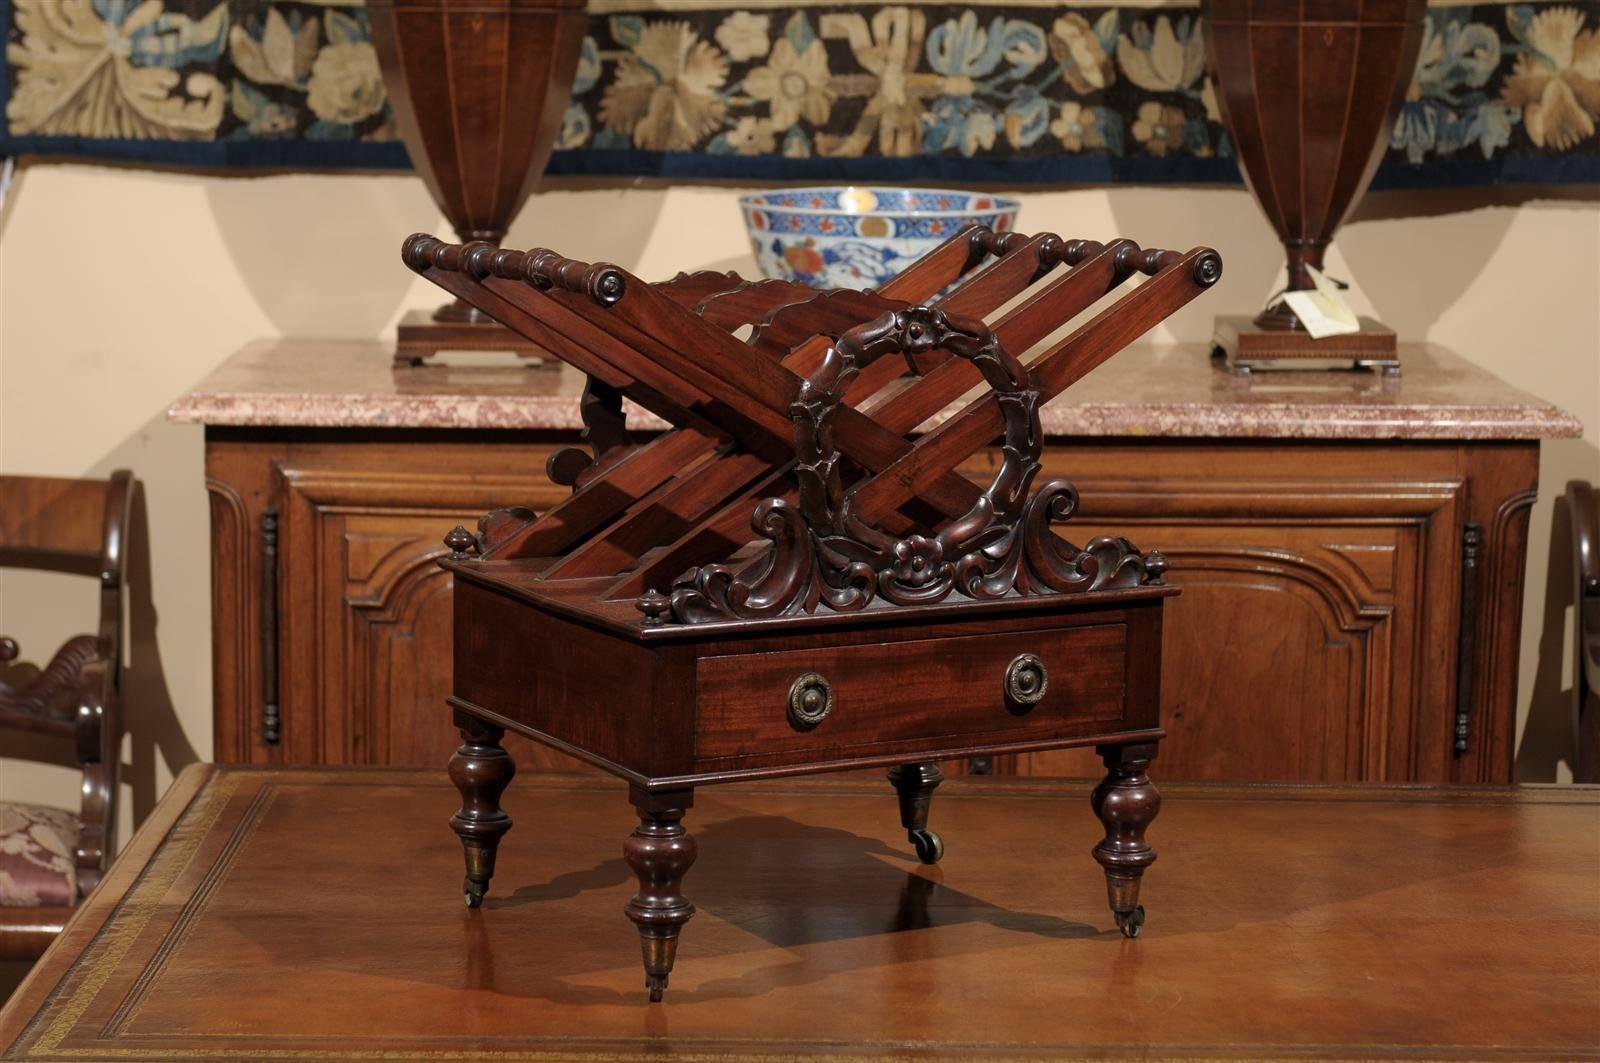 19th century English mahogany Canterbury with drawer and wreath design.